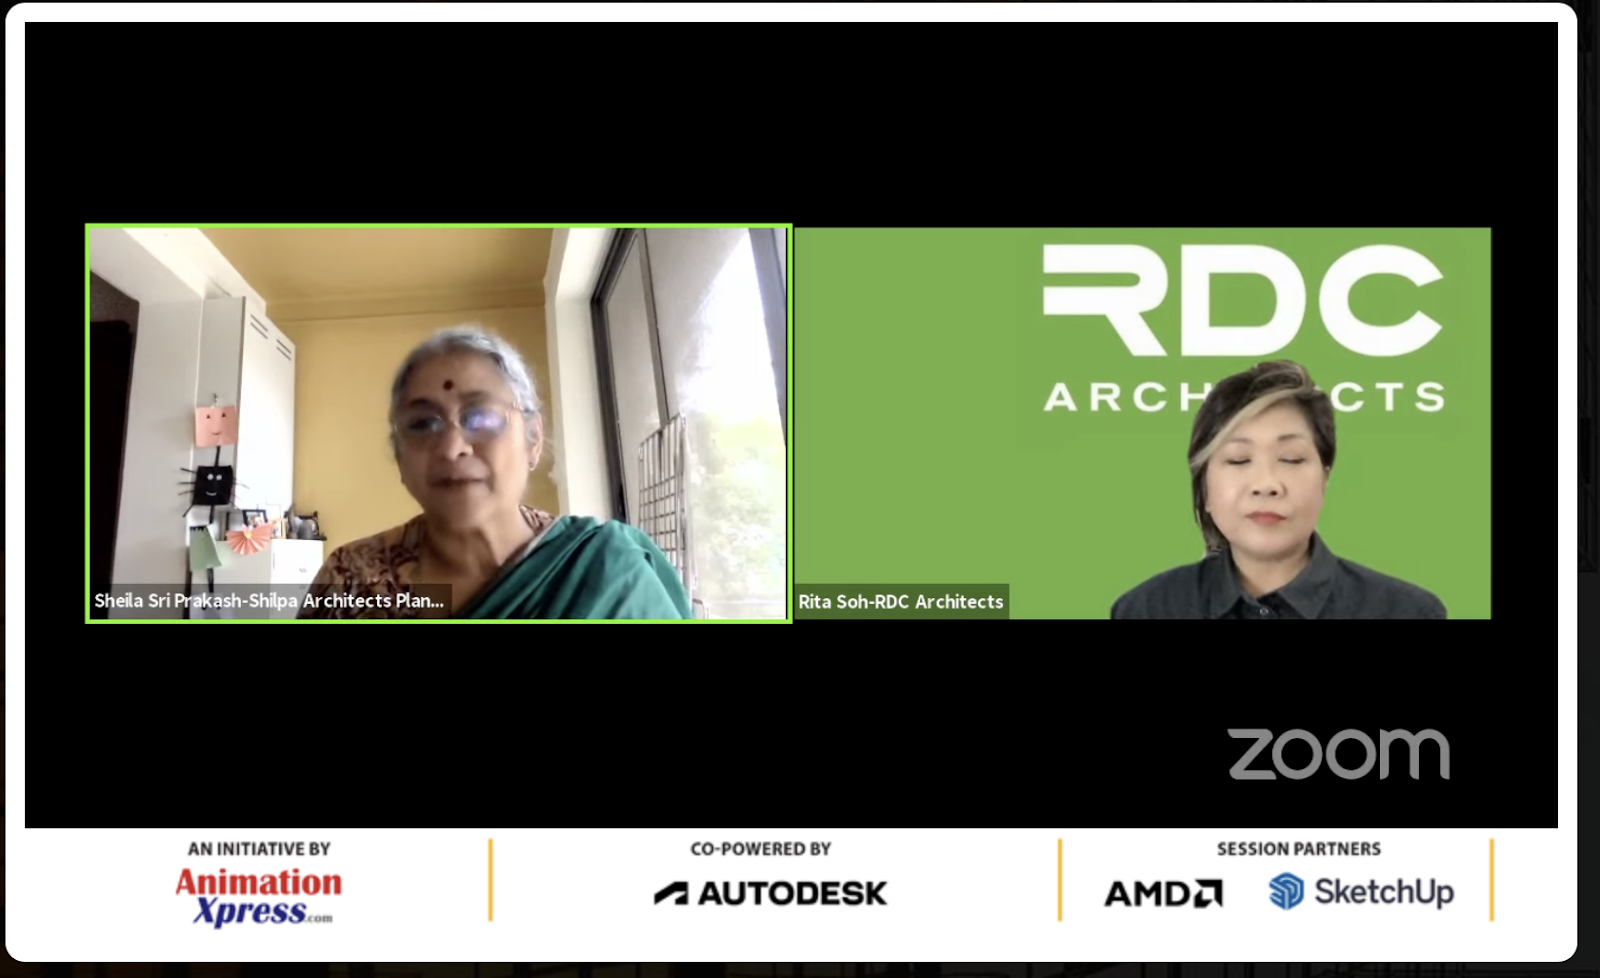 A successful round of architectural design discourses that ignited change: Architecture, Design & More summit 2021 by AnimationXpress (part of IndianTelevision.com Group)